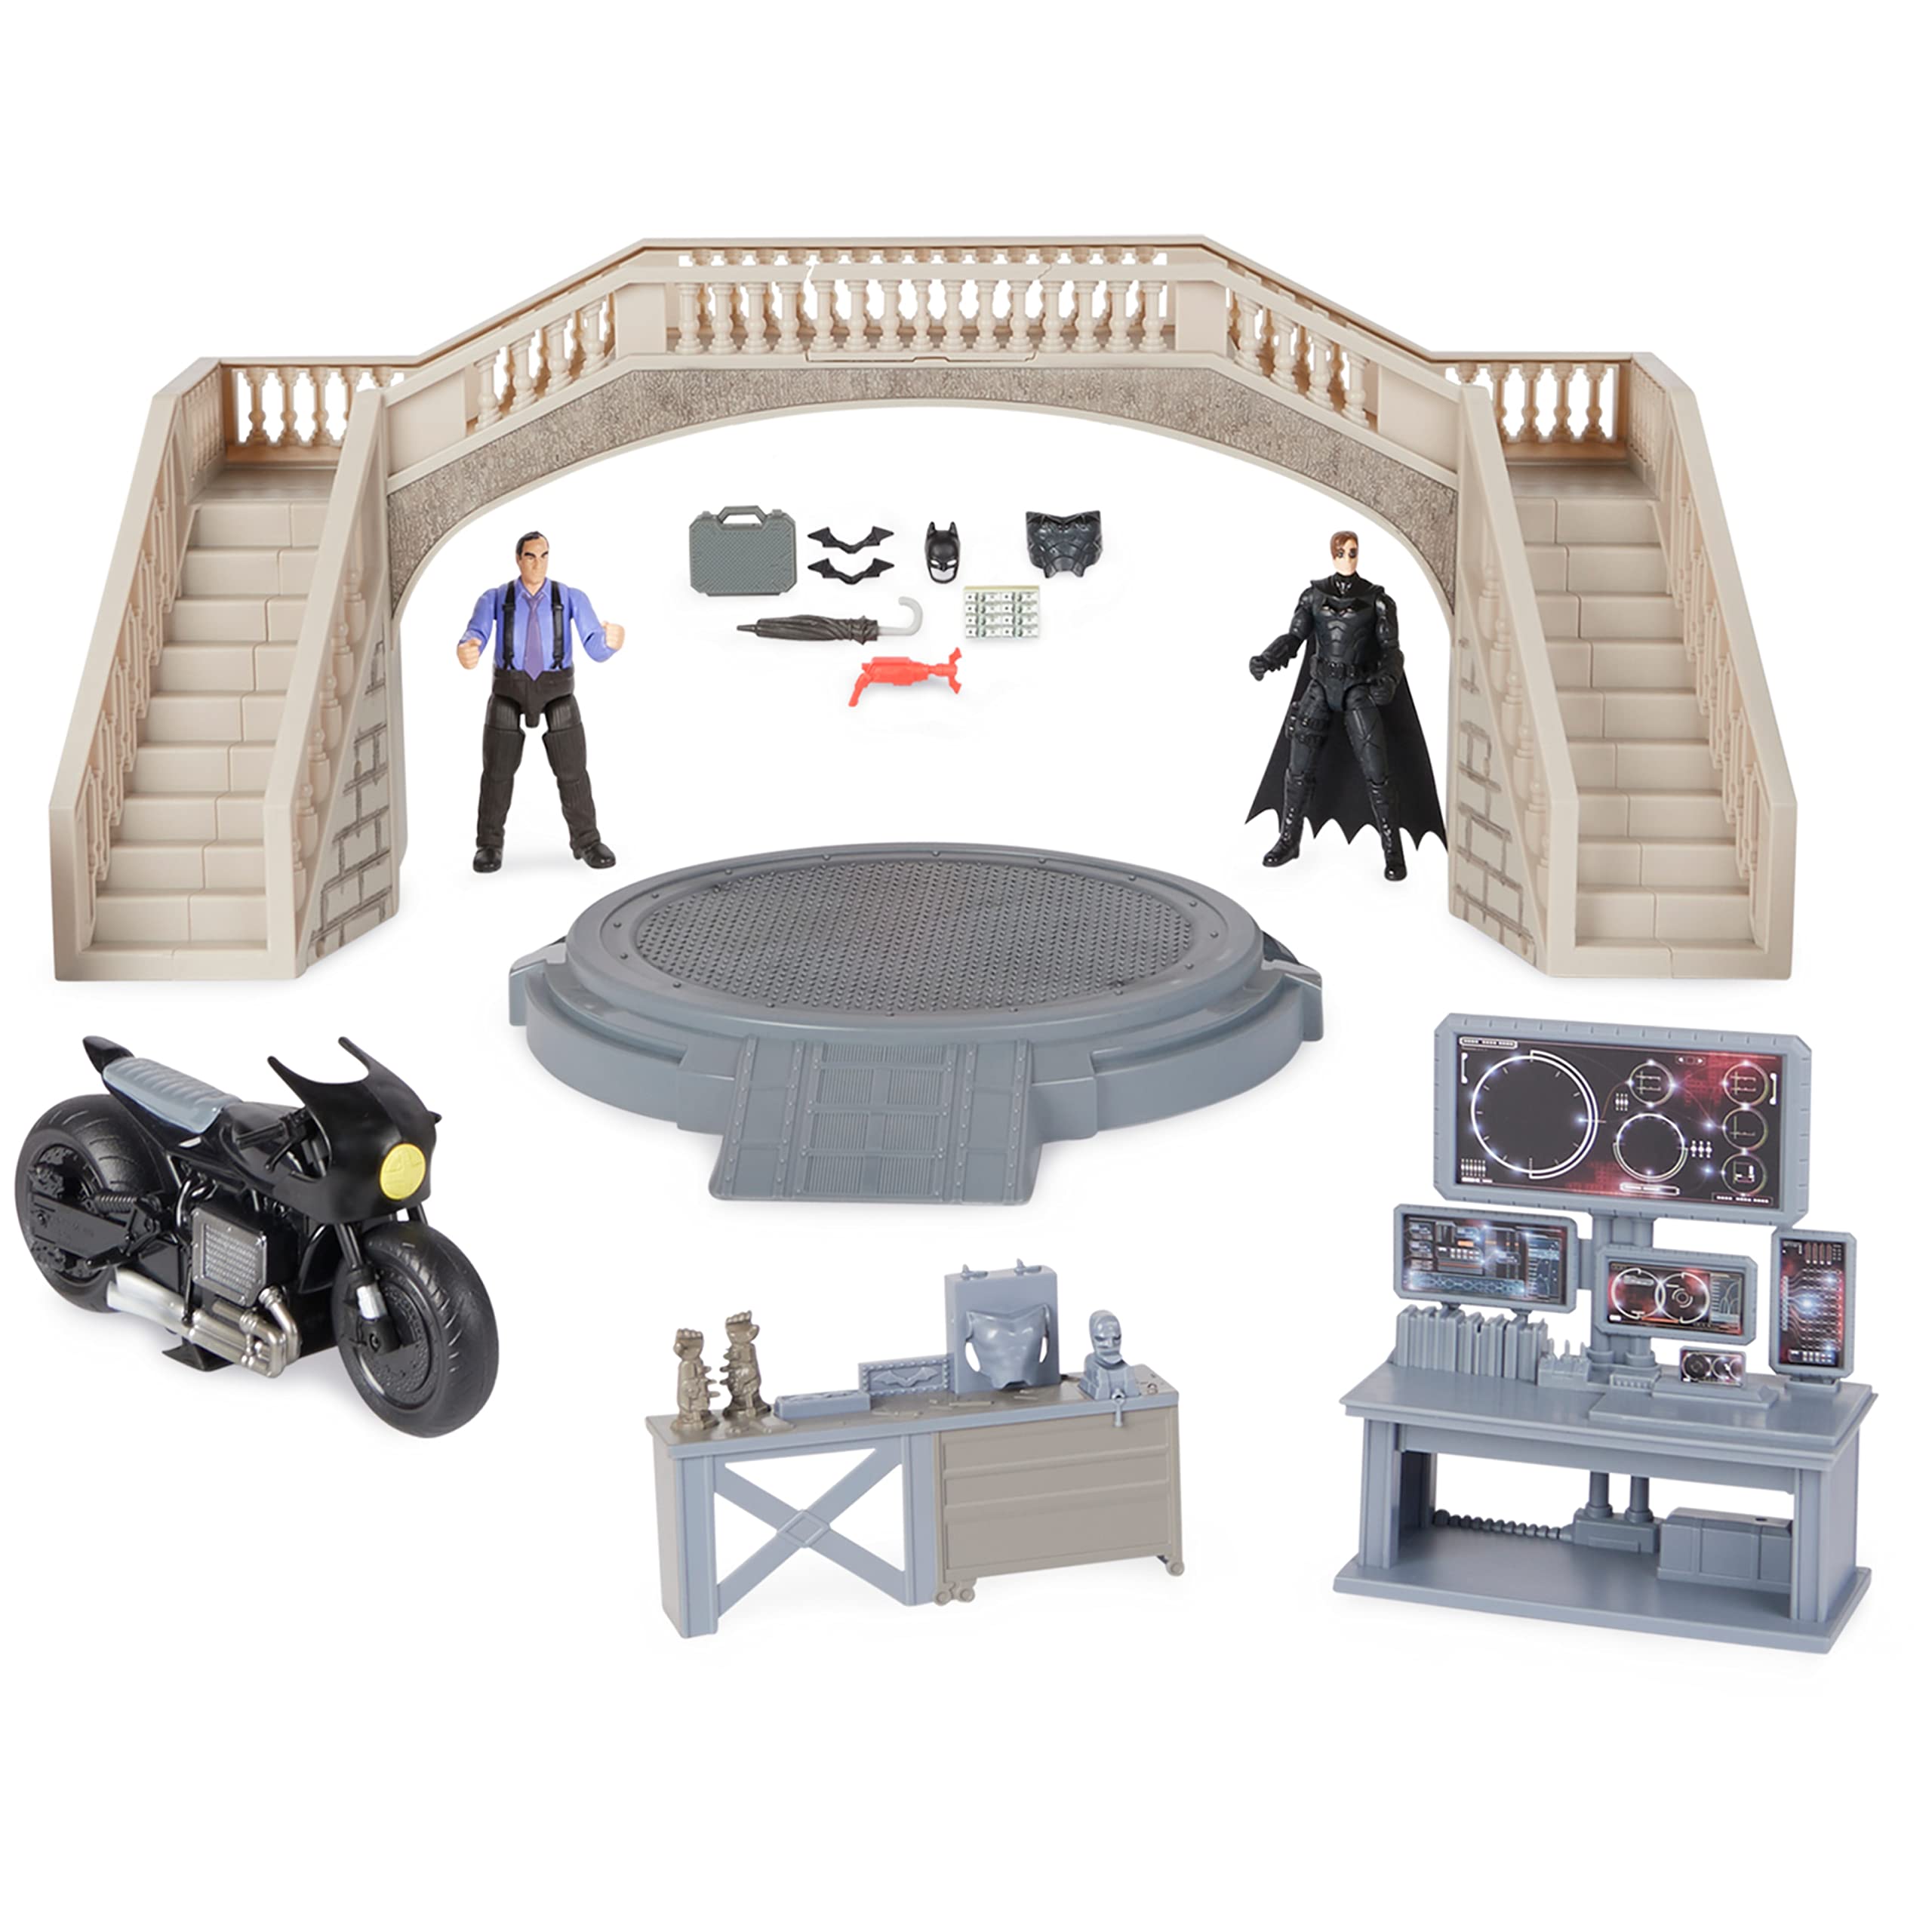 DC Comics, Batman Batcave with Exclusive Batman and Penguin Action Figures and Batcycle, The Batman Movie Collectible Kids Toys for Boys Ages 3 and Up